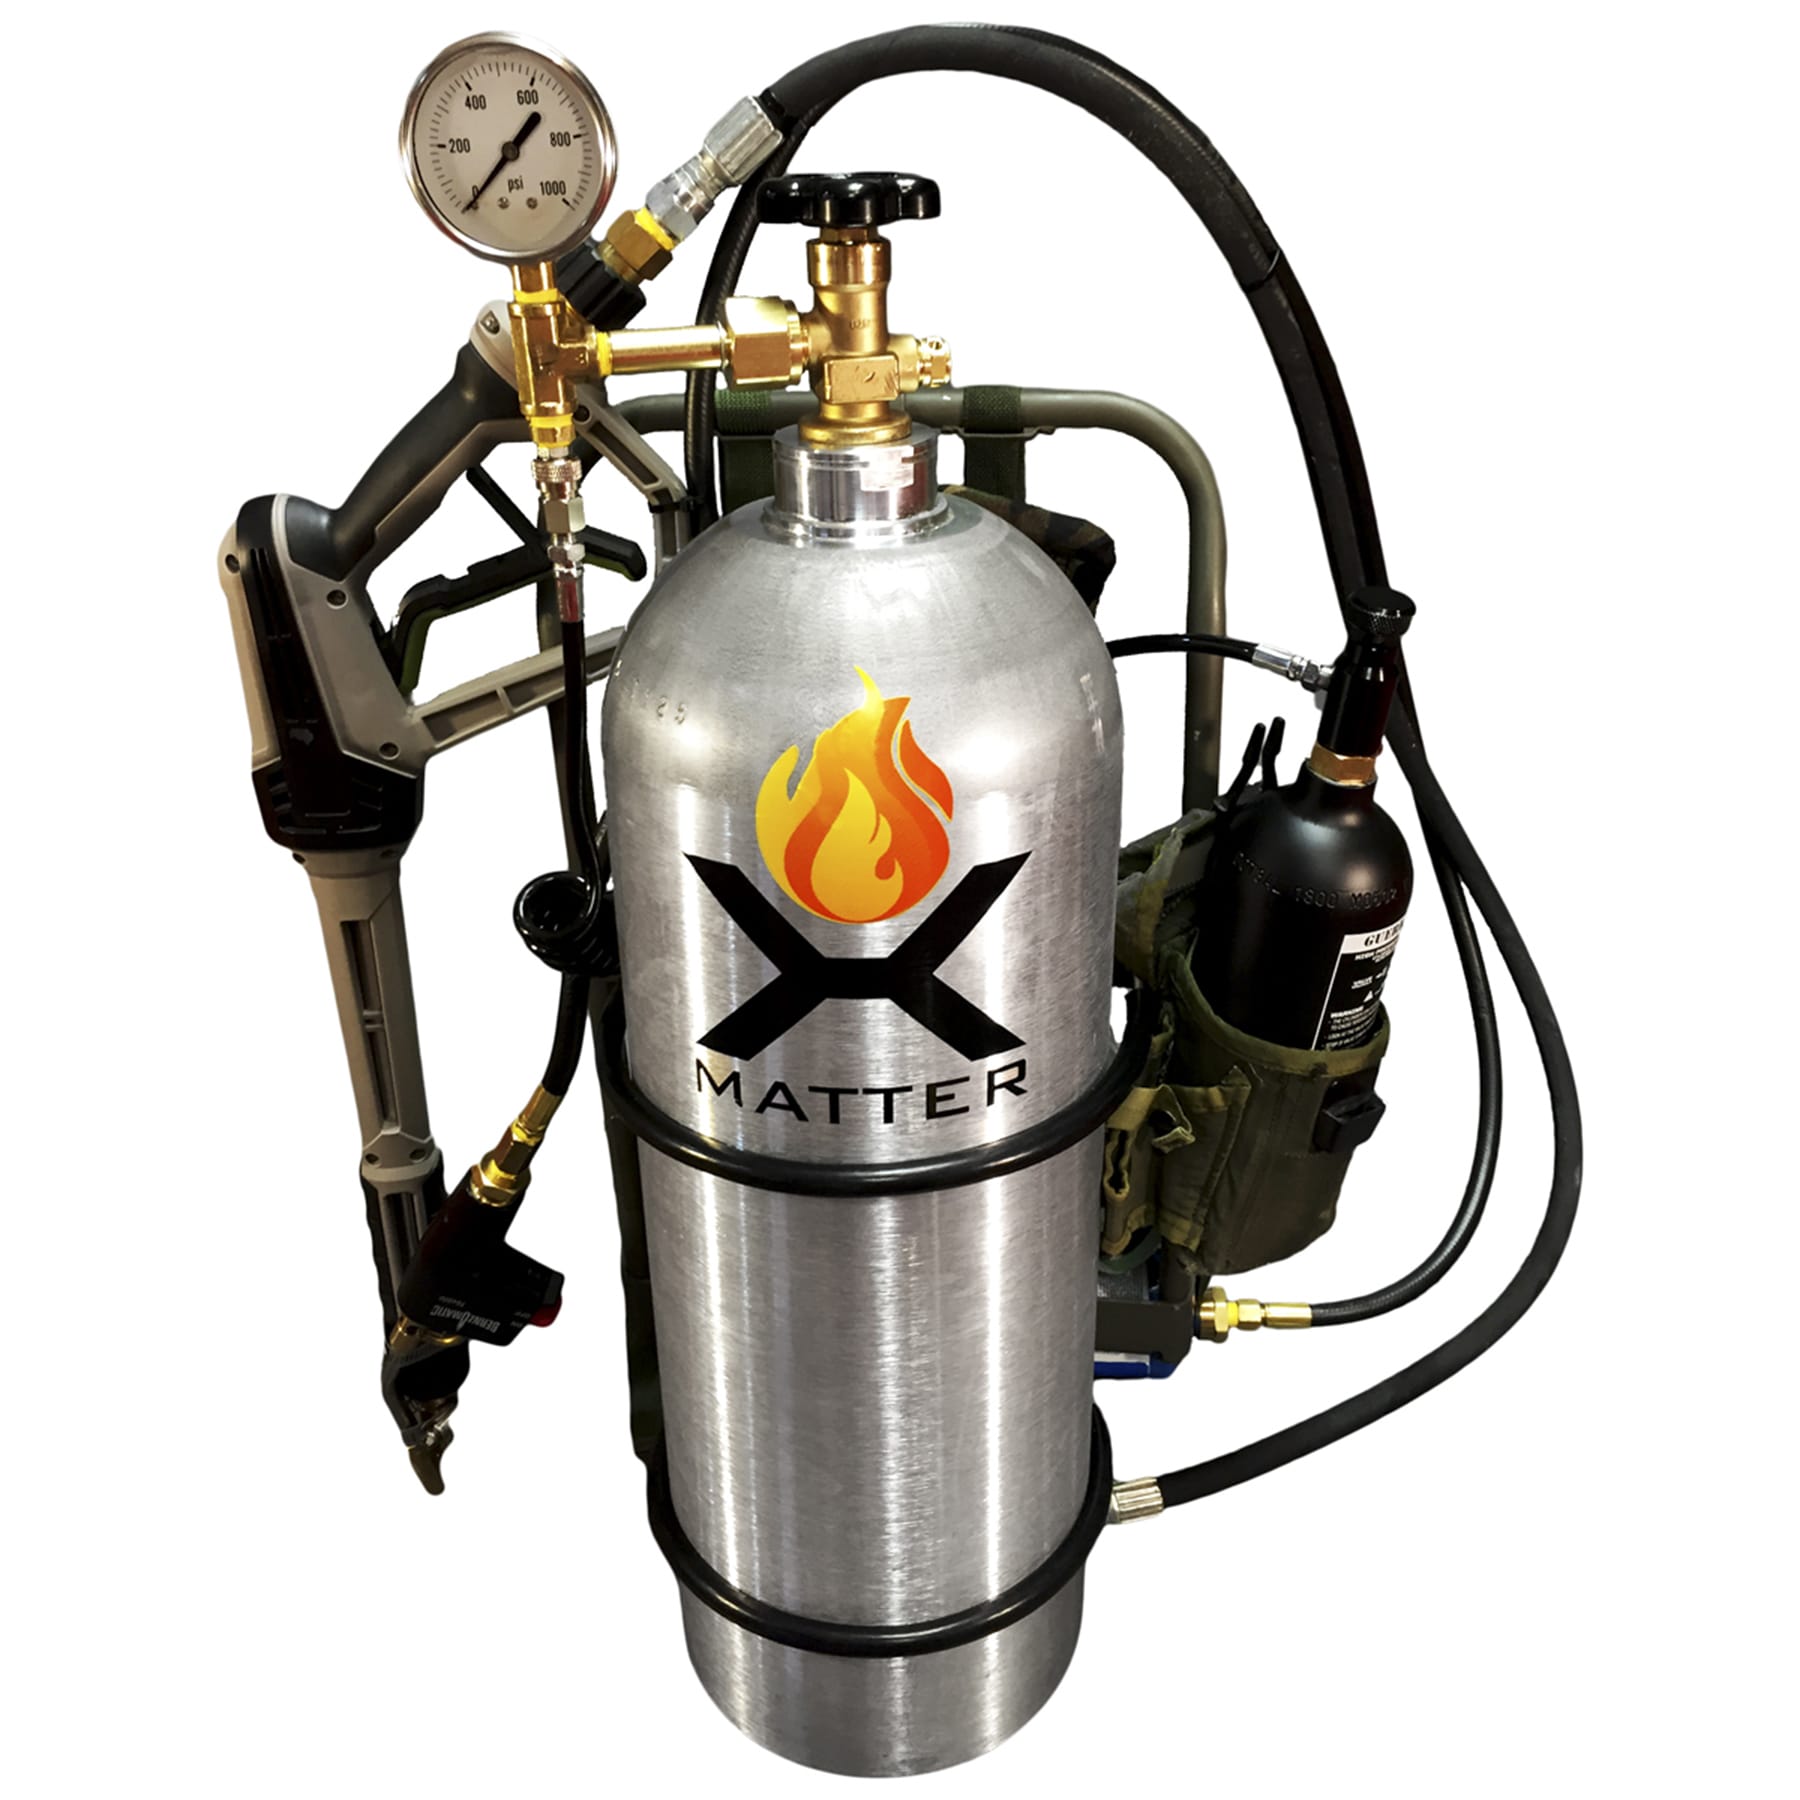 The X15 was the first commercially available personal flamethrower on the market. It costs $1,599 and can shoot flames 25-50 feet. It is manufactured by XMatter near Cleveland.